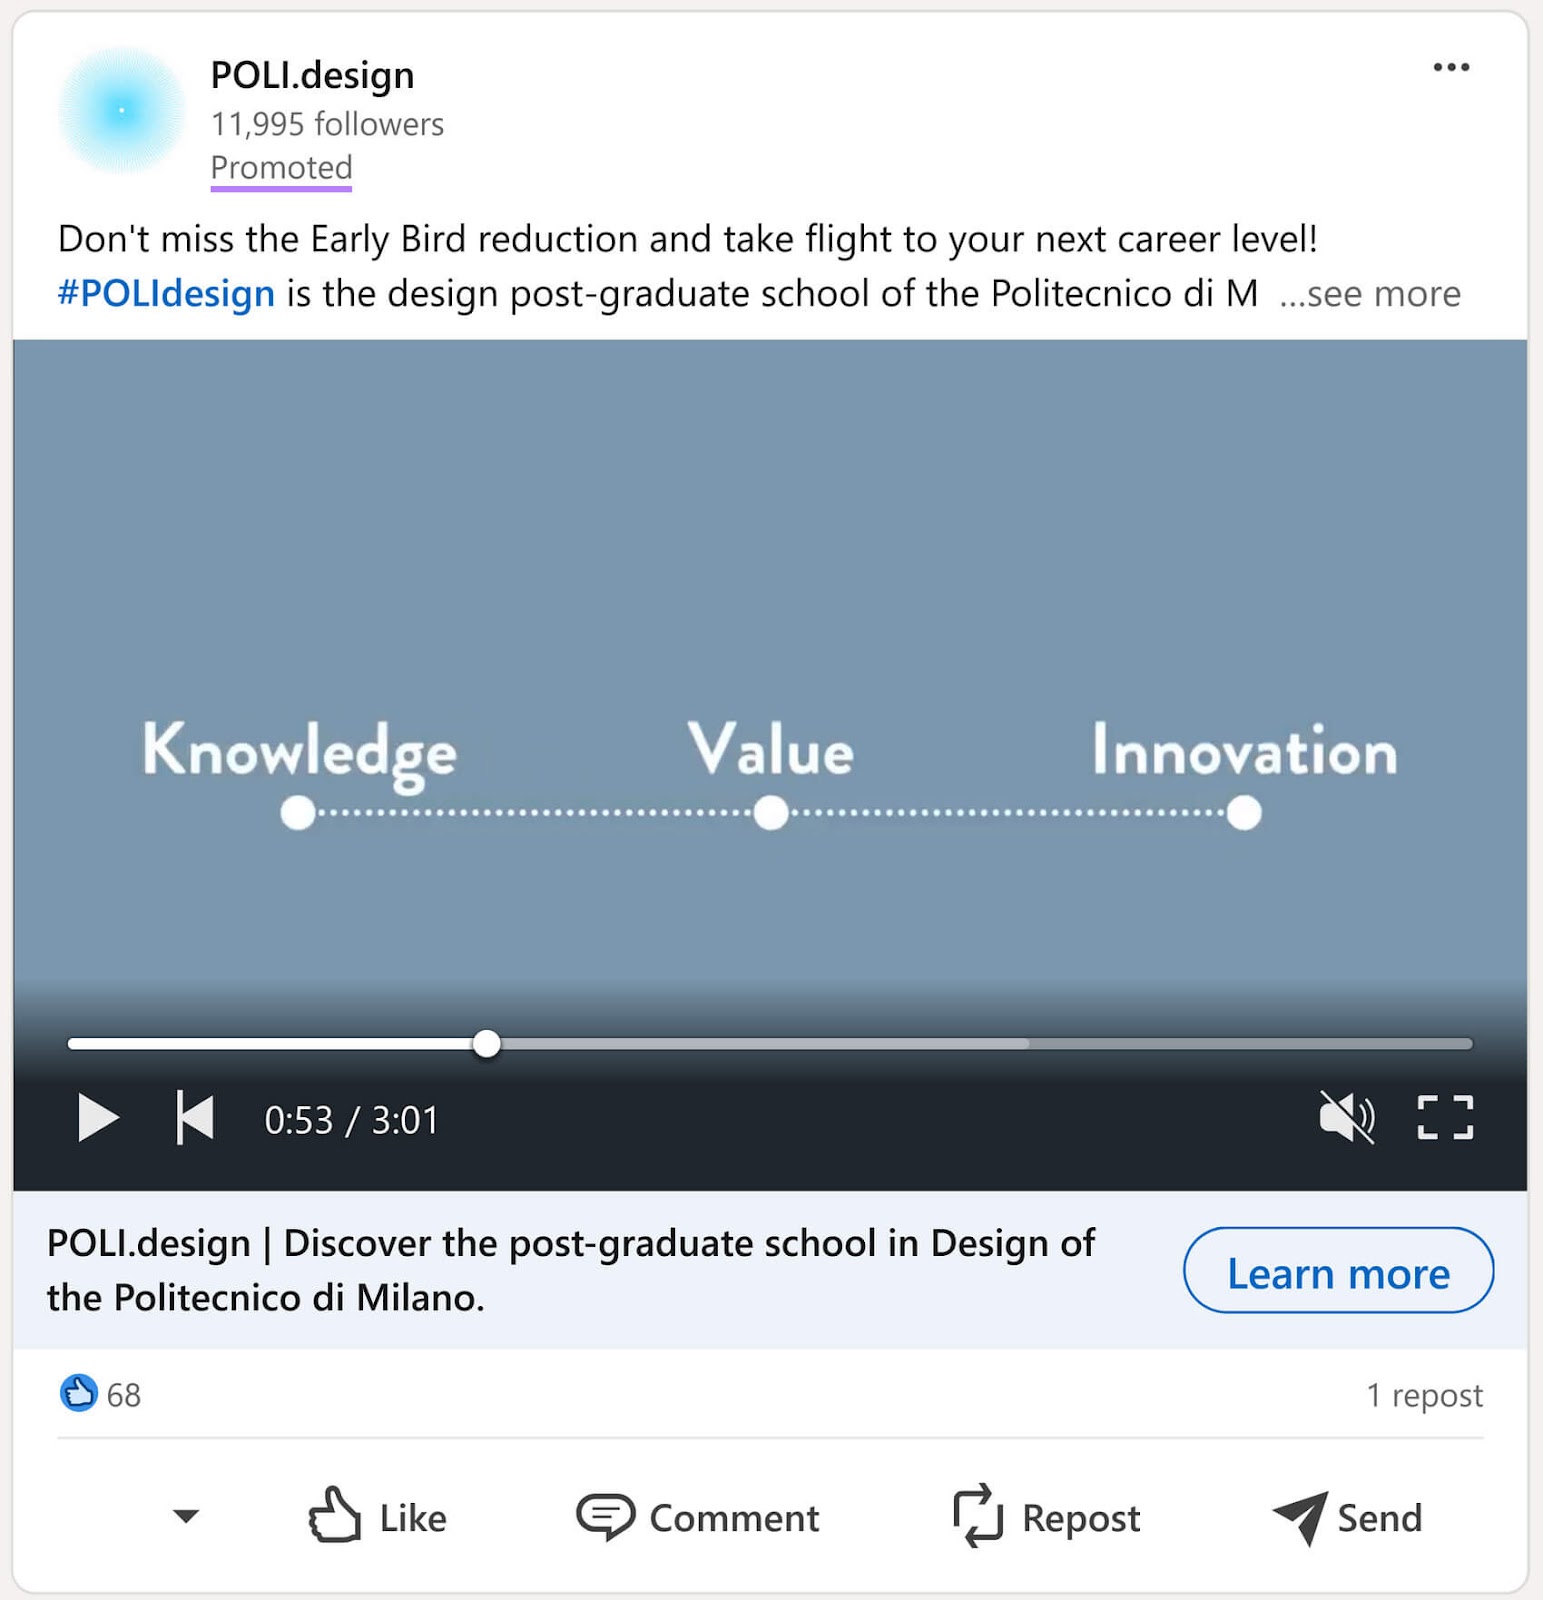 A video connected  from POLI.design connected  LinkedIn